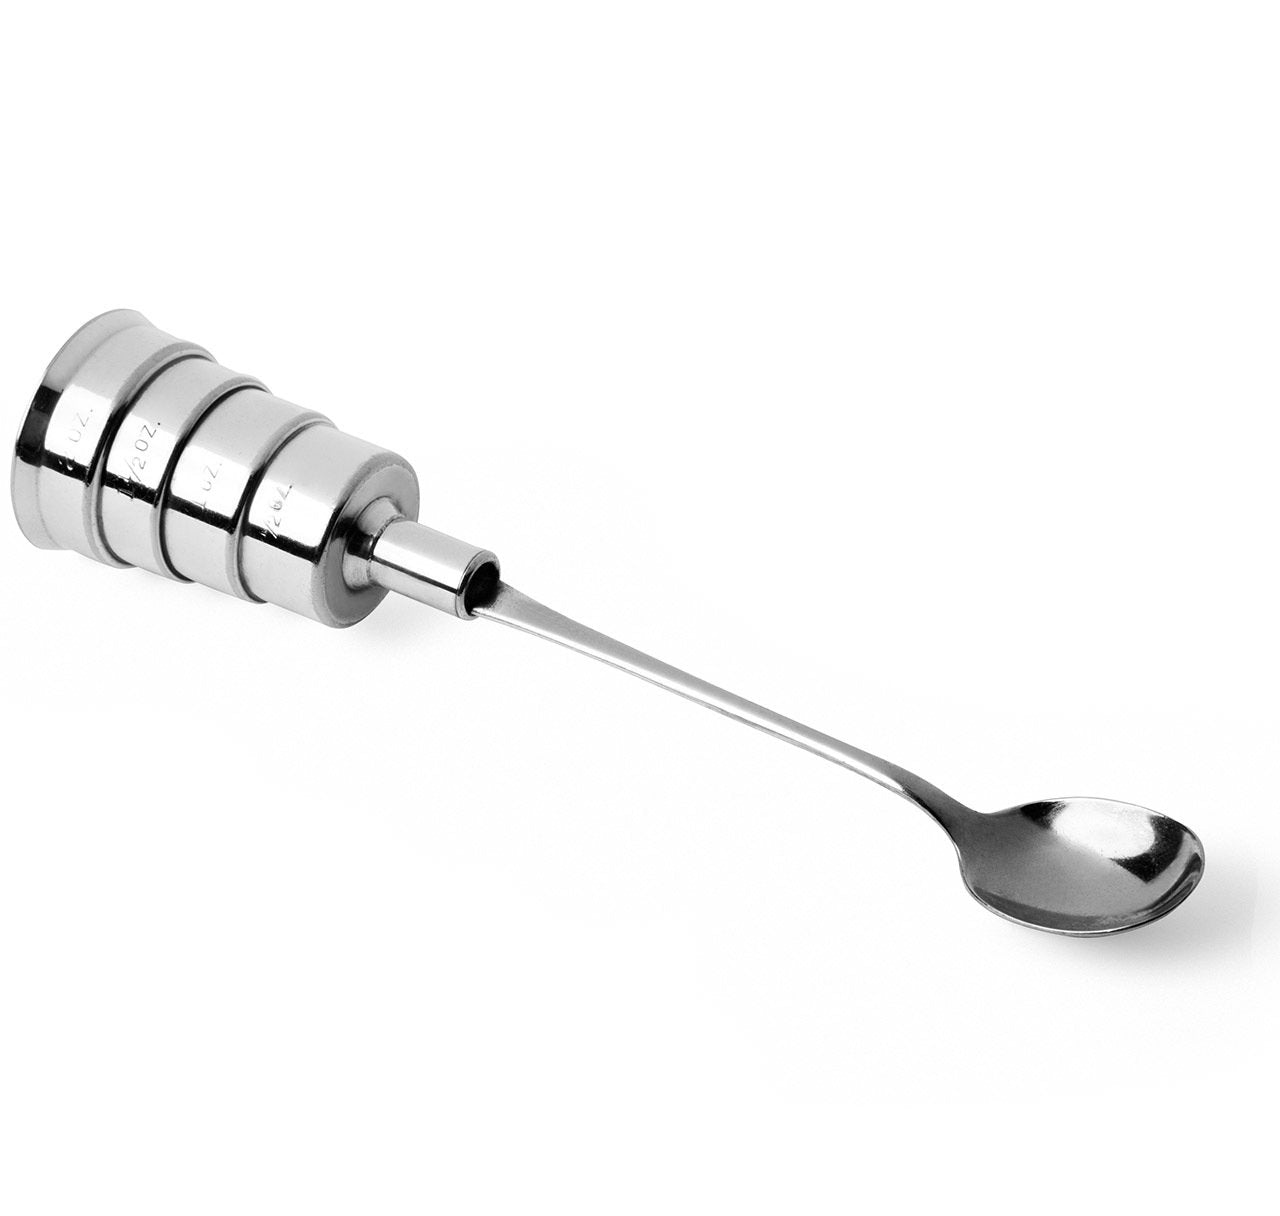 Napier Silver-Plated Valve Jigger Cocktail Spoon